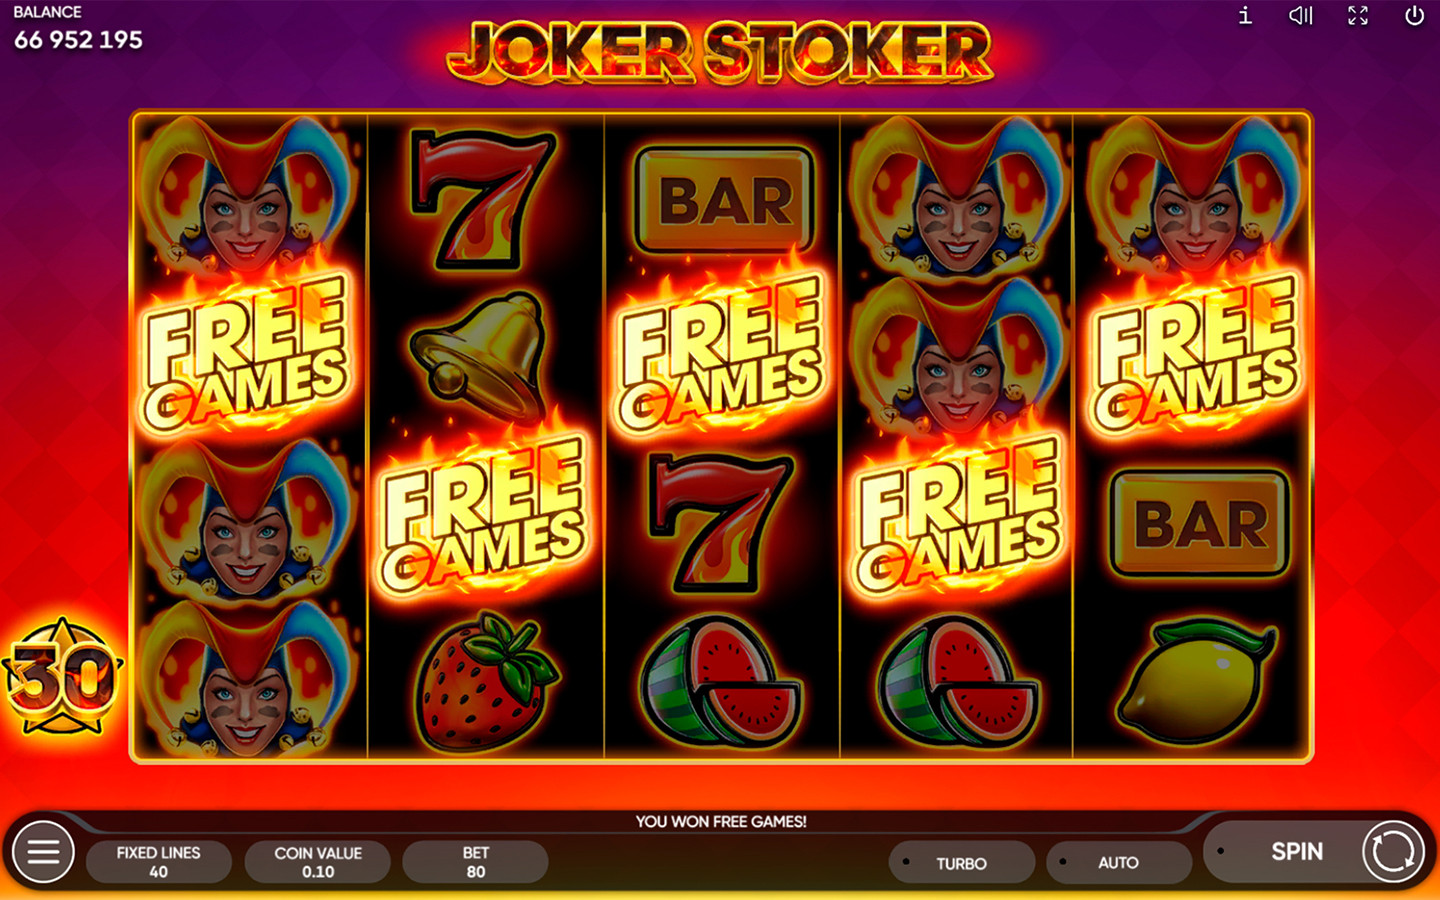 Top 5 Tips for Playing Joker Slot Like a Pro